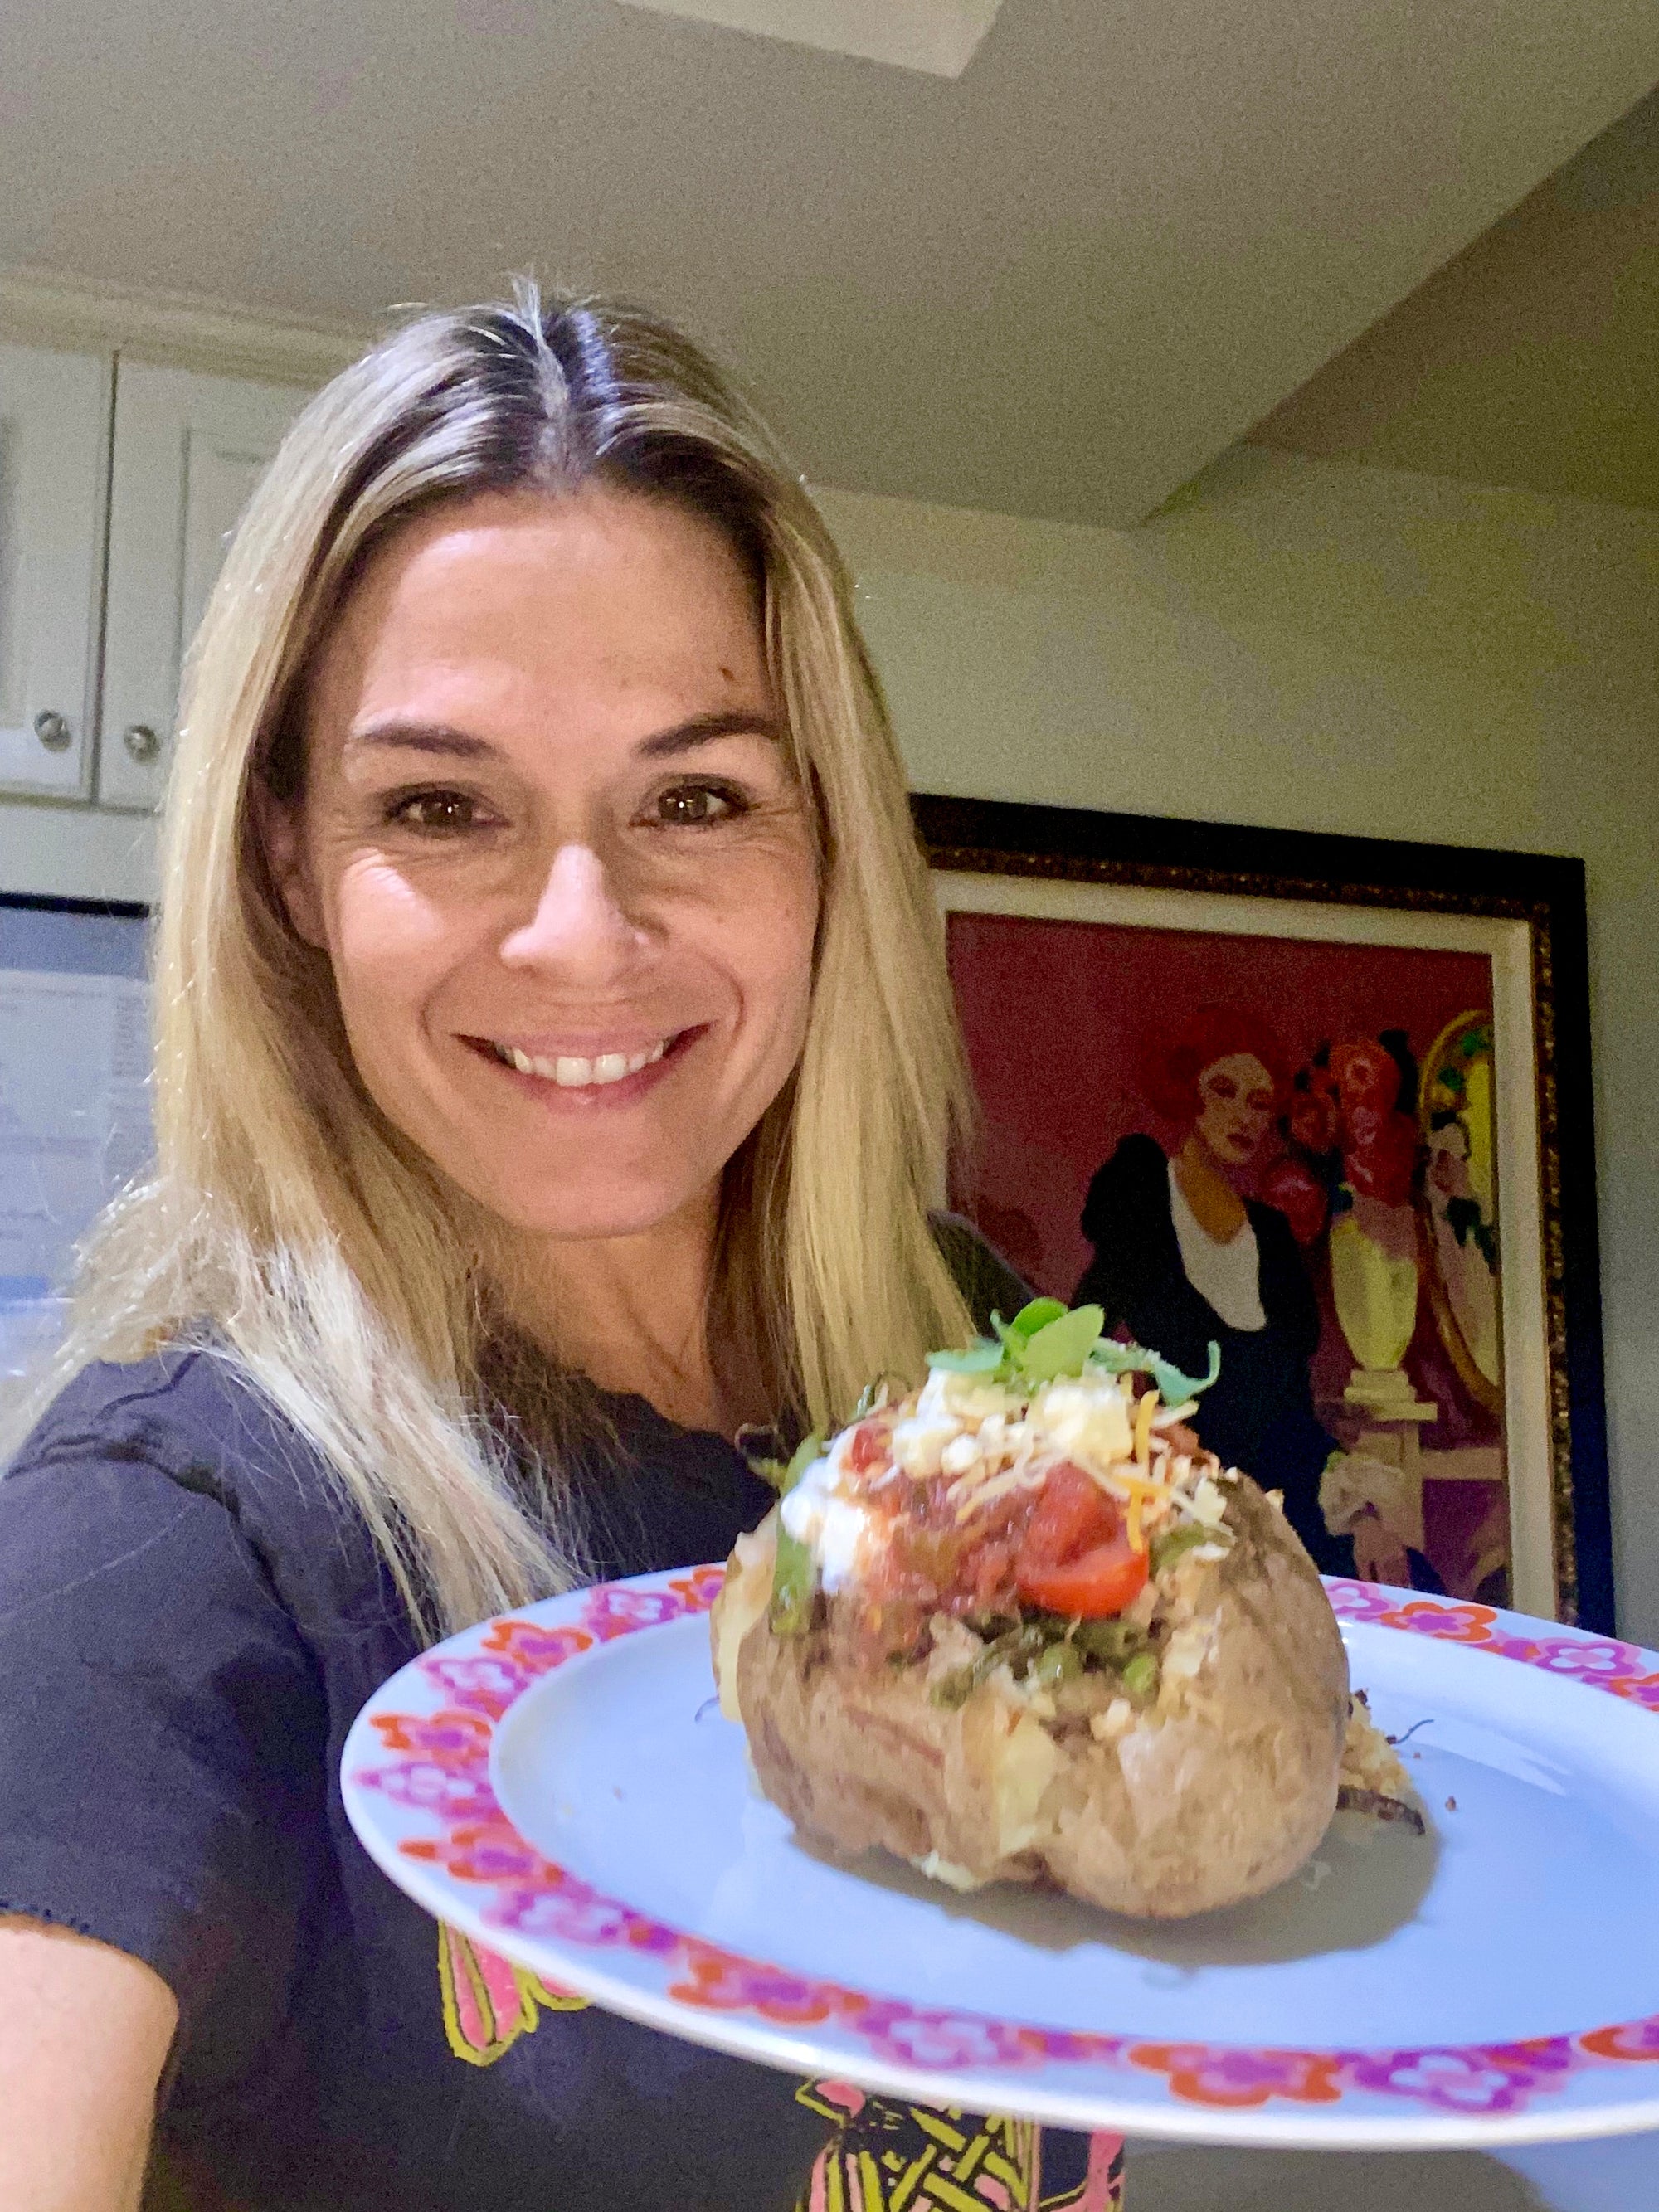 Cat Cora’s Loaded Baked Potato with Veggies, Cheese & Tomato Sauce